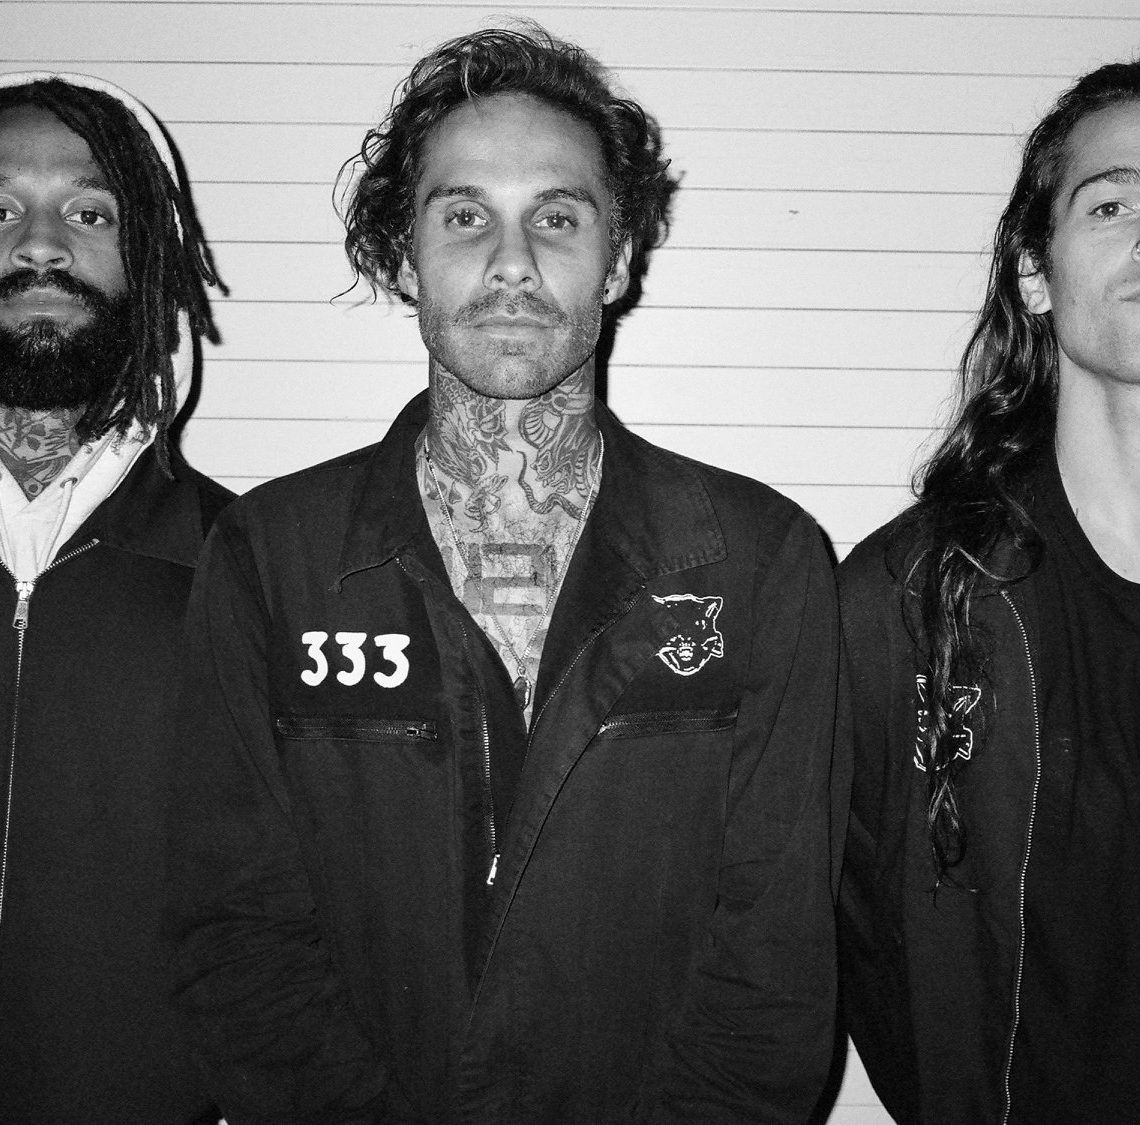 FEVER 333 share new song “Vandals”